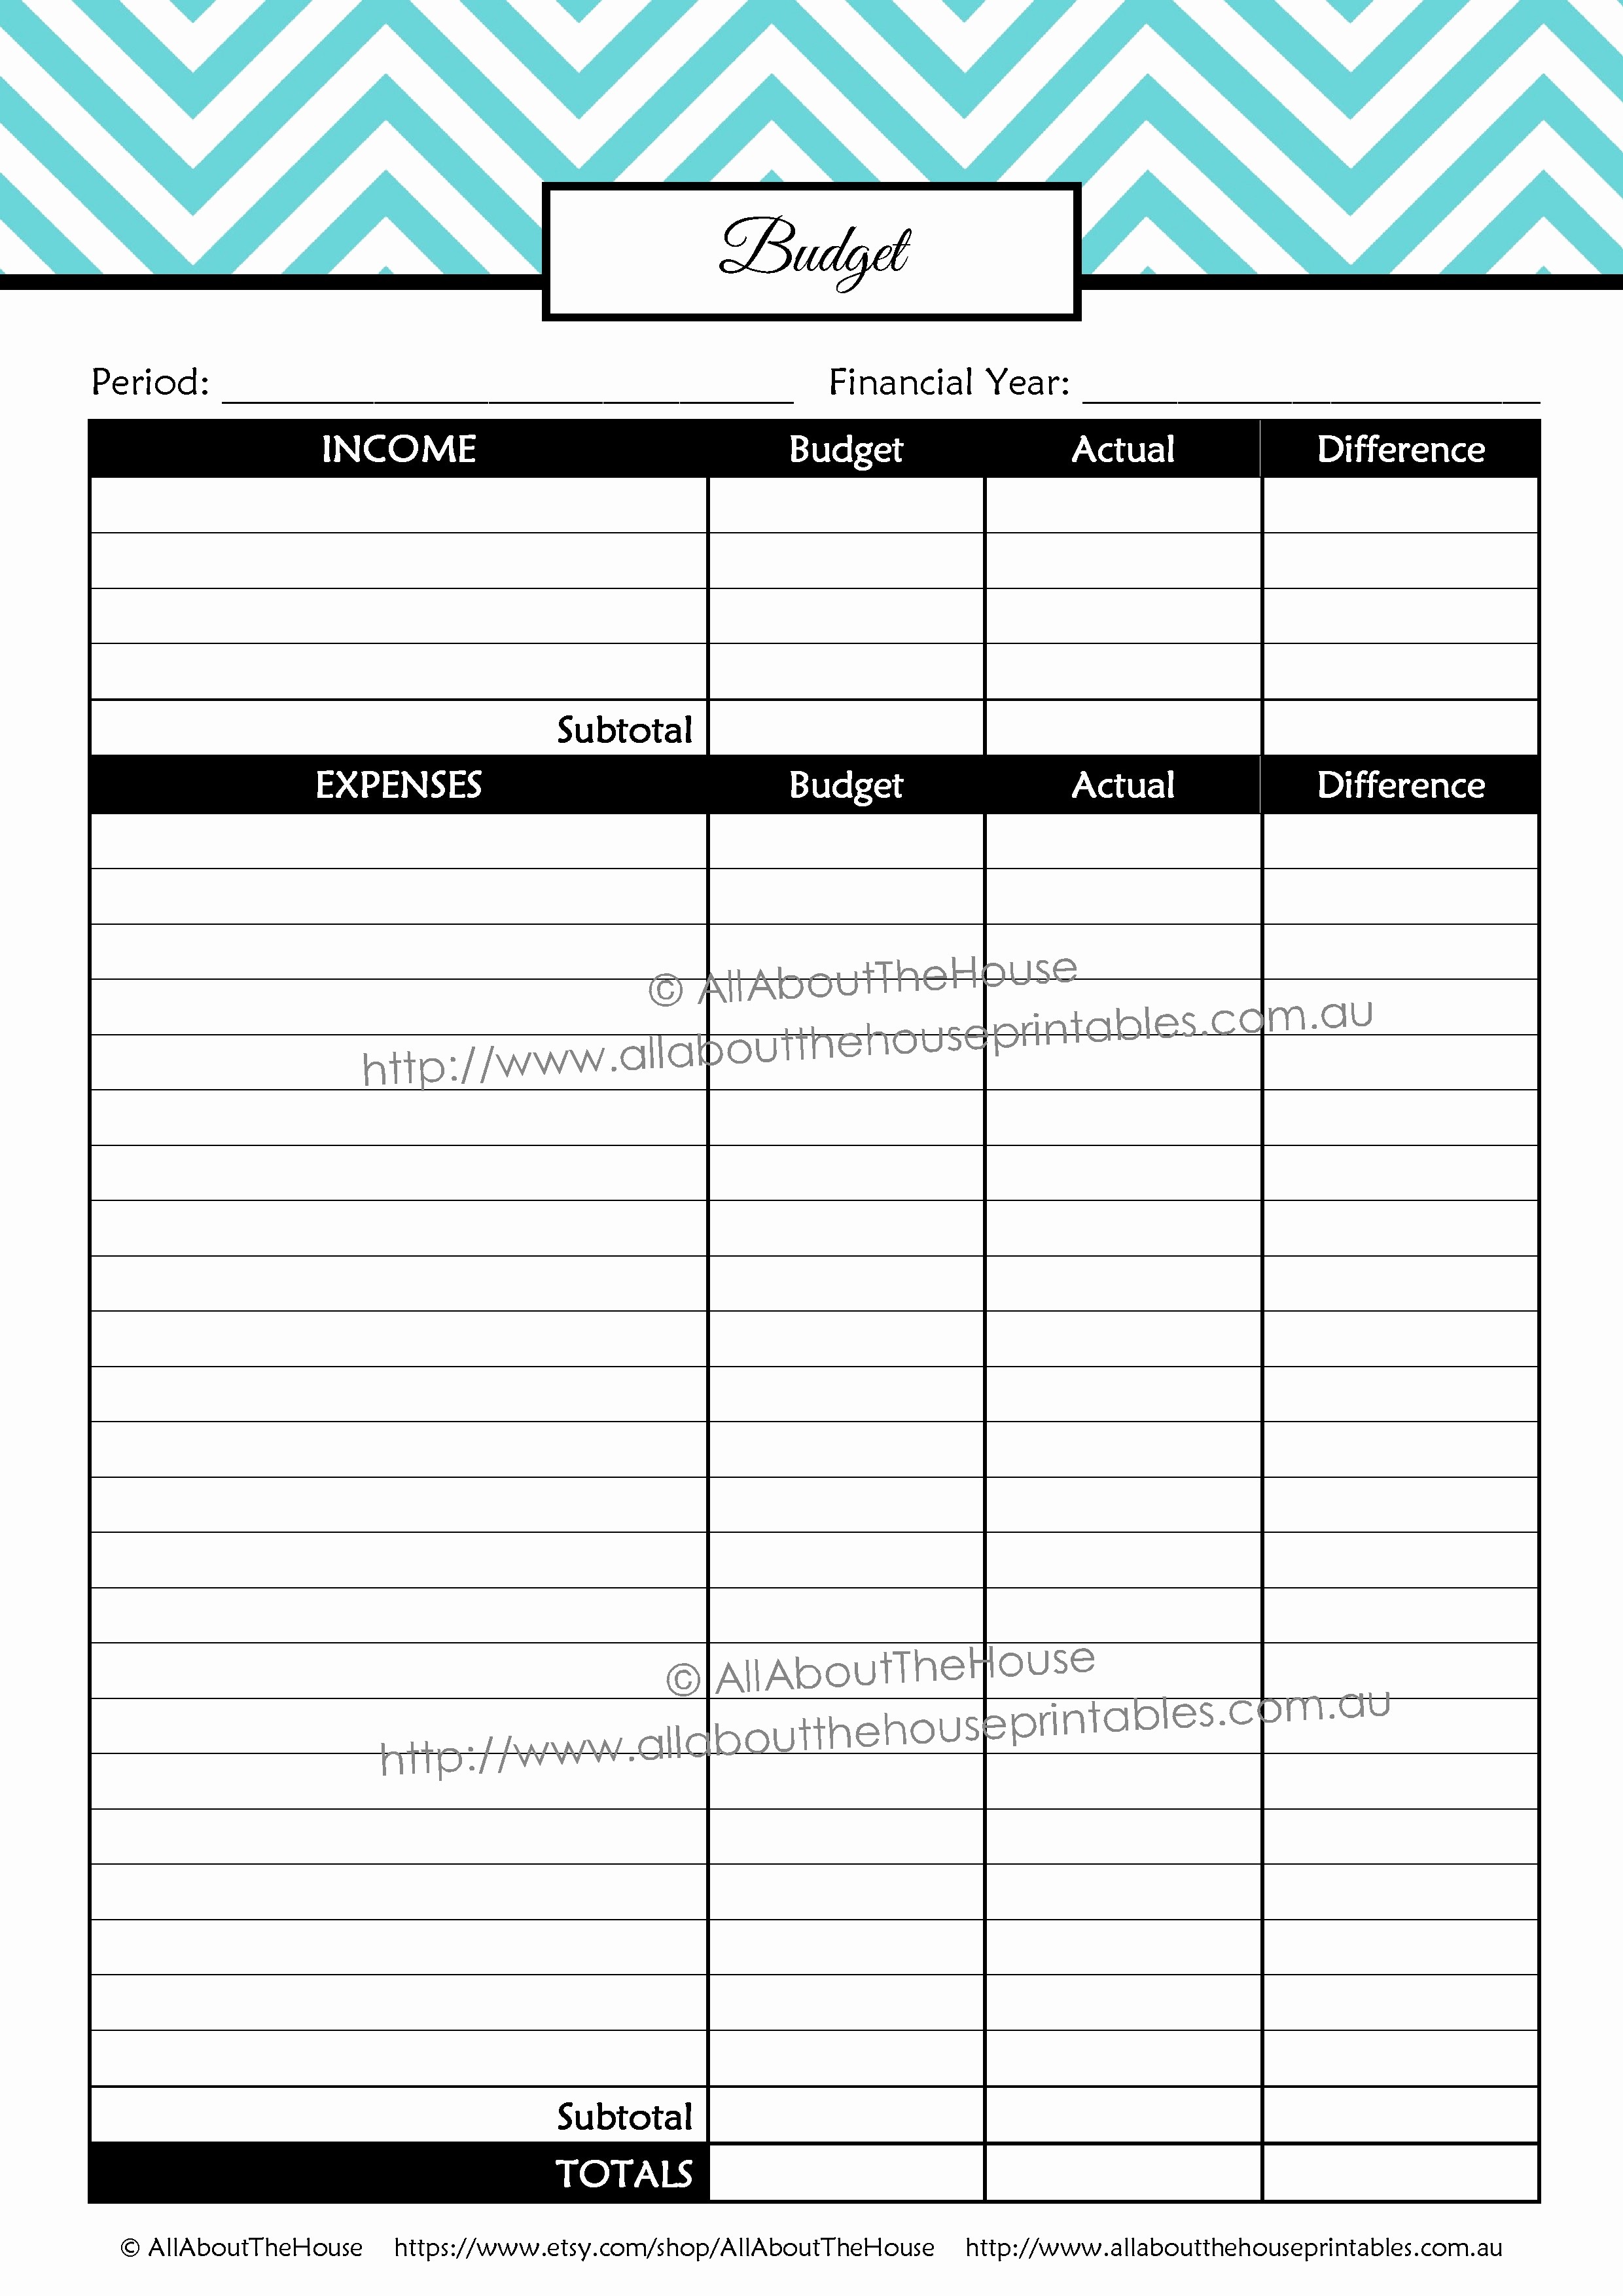 Monthly Retirement Planning Worksheet Answers Dave Ramsey Best Of Document